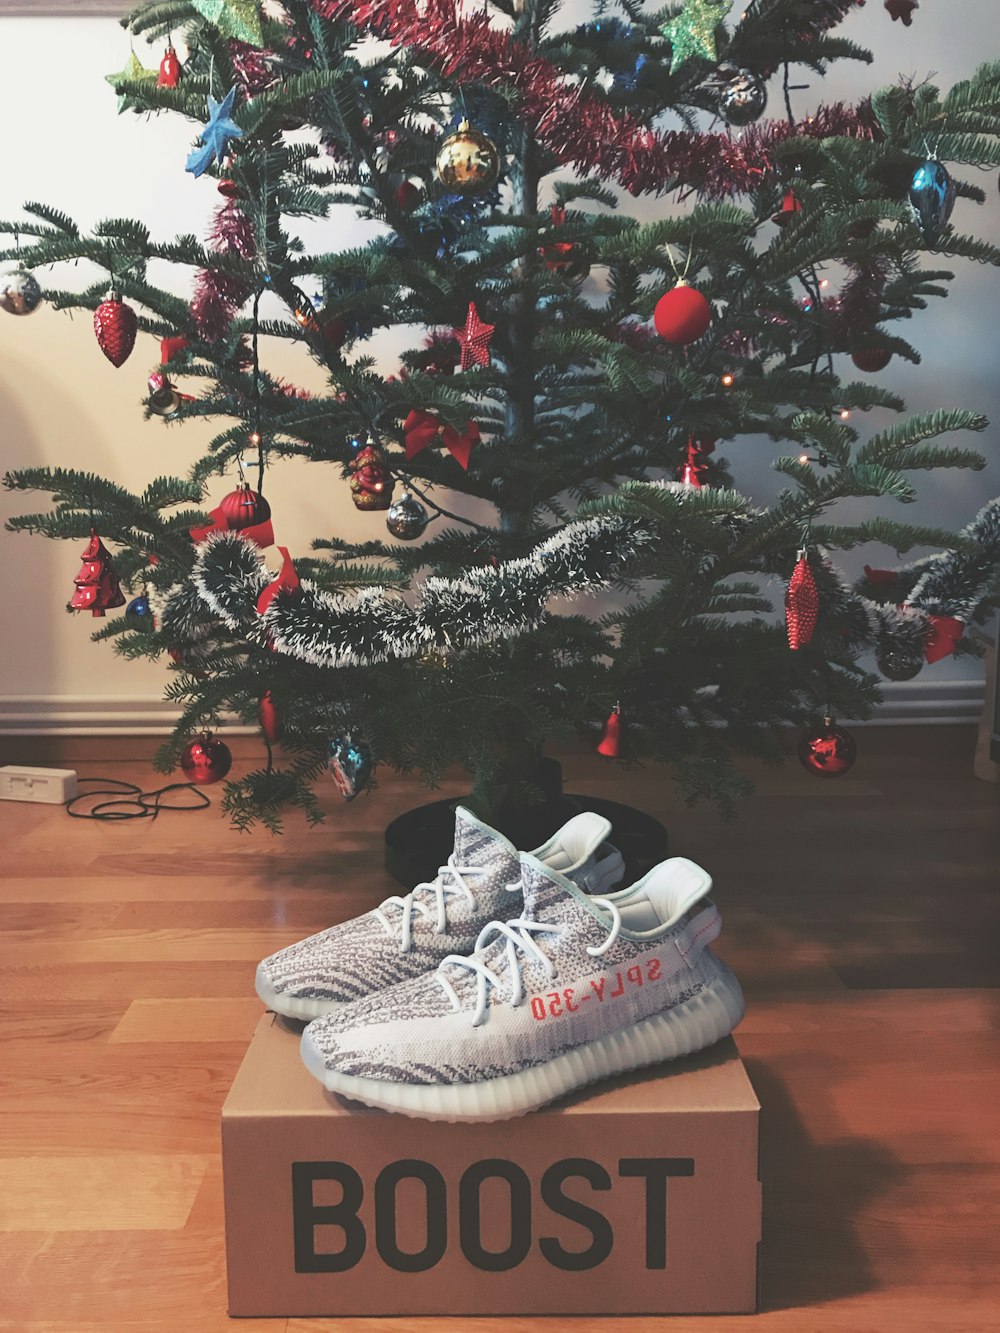 White-and-gray Adidas Yeezy Boost 350 V2 shoes with box photo – Free  Romania Image on Unsplash